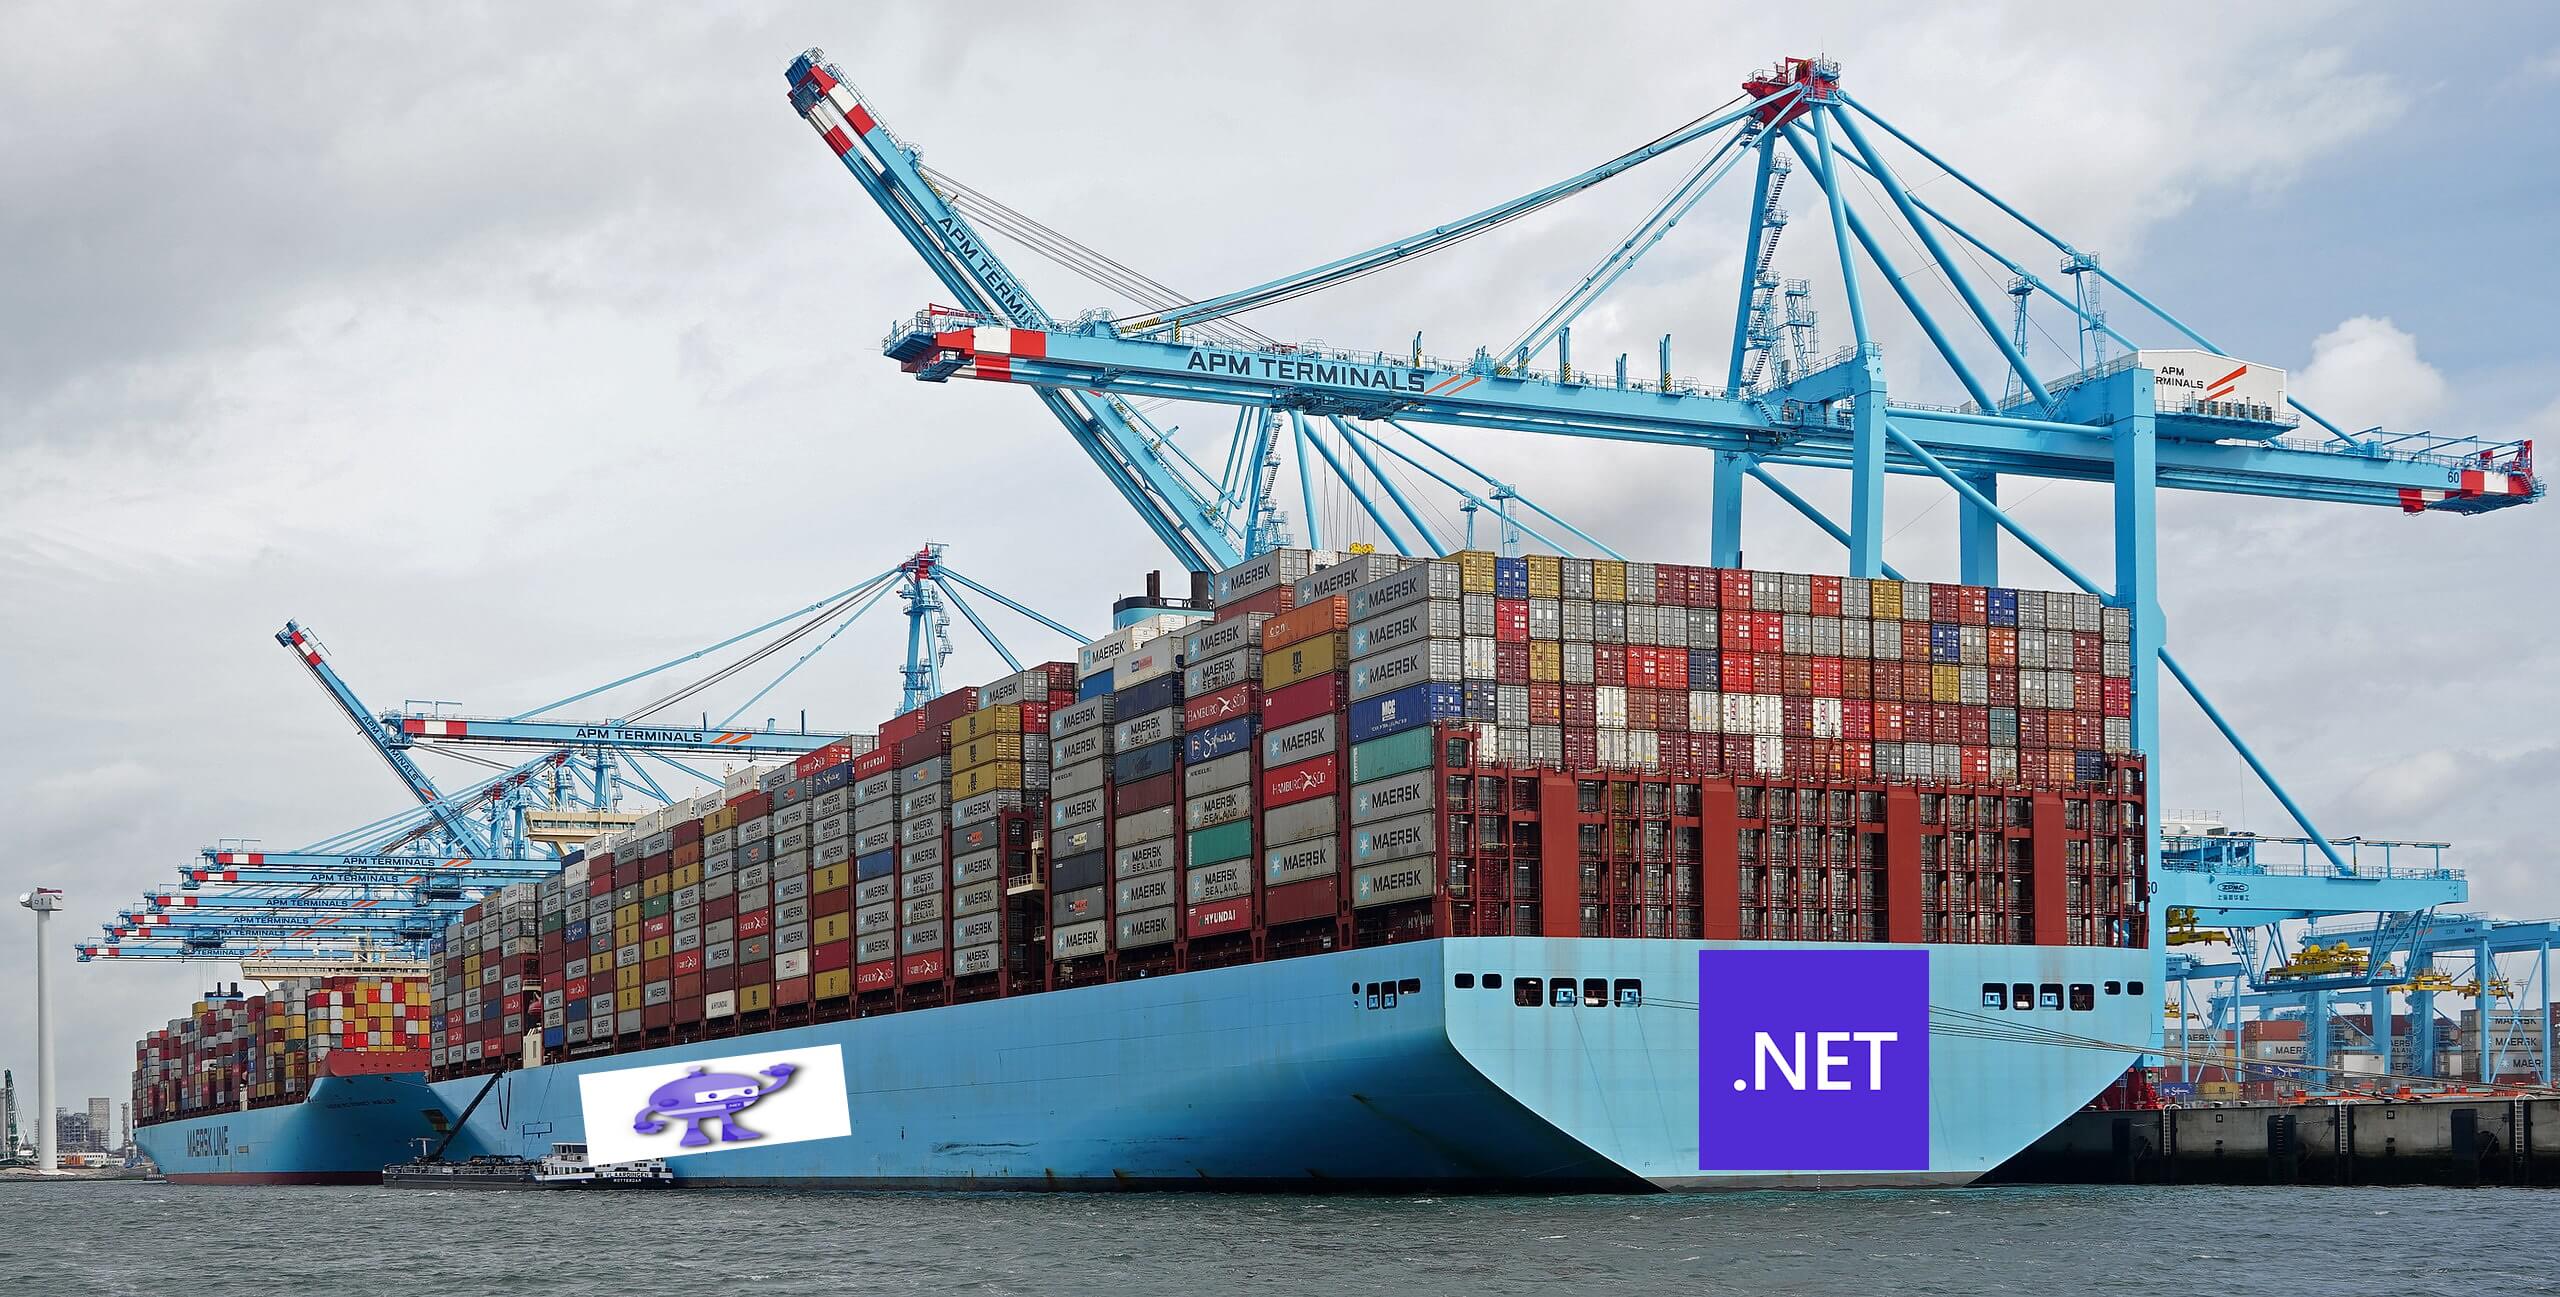 A container ship being loaded with the .NET logo on the stern